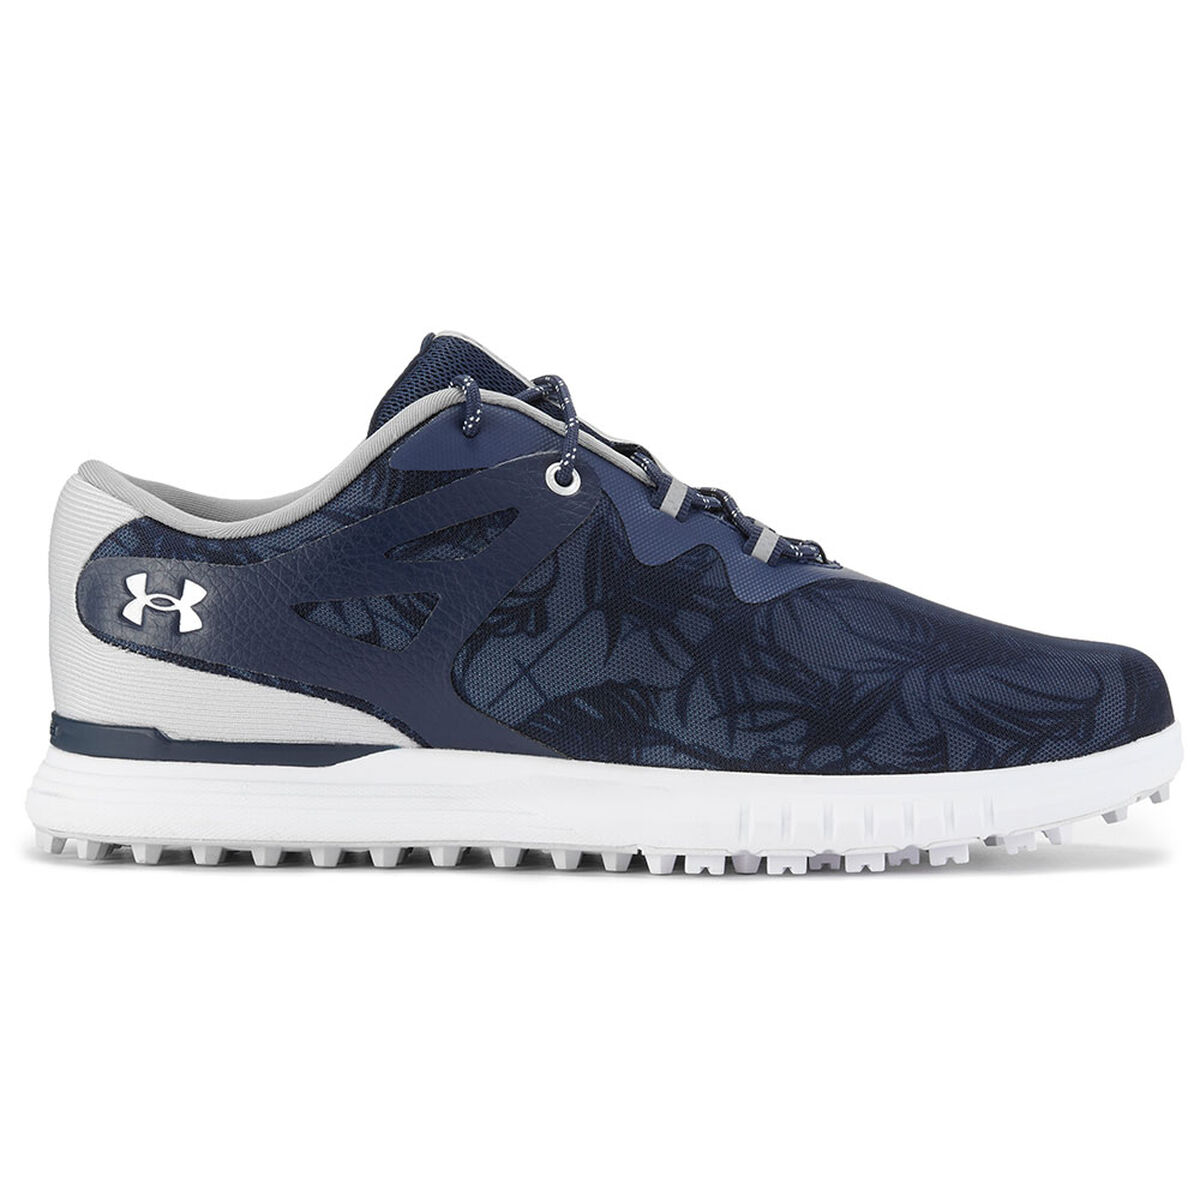 Chaussures Under Armour Charged Breathe Textile pour femmes, femme, 4, Academy/met silver/met silver